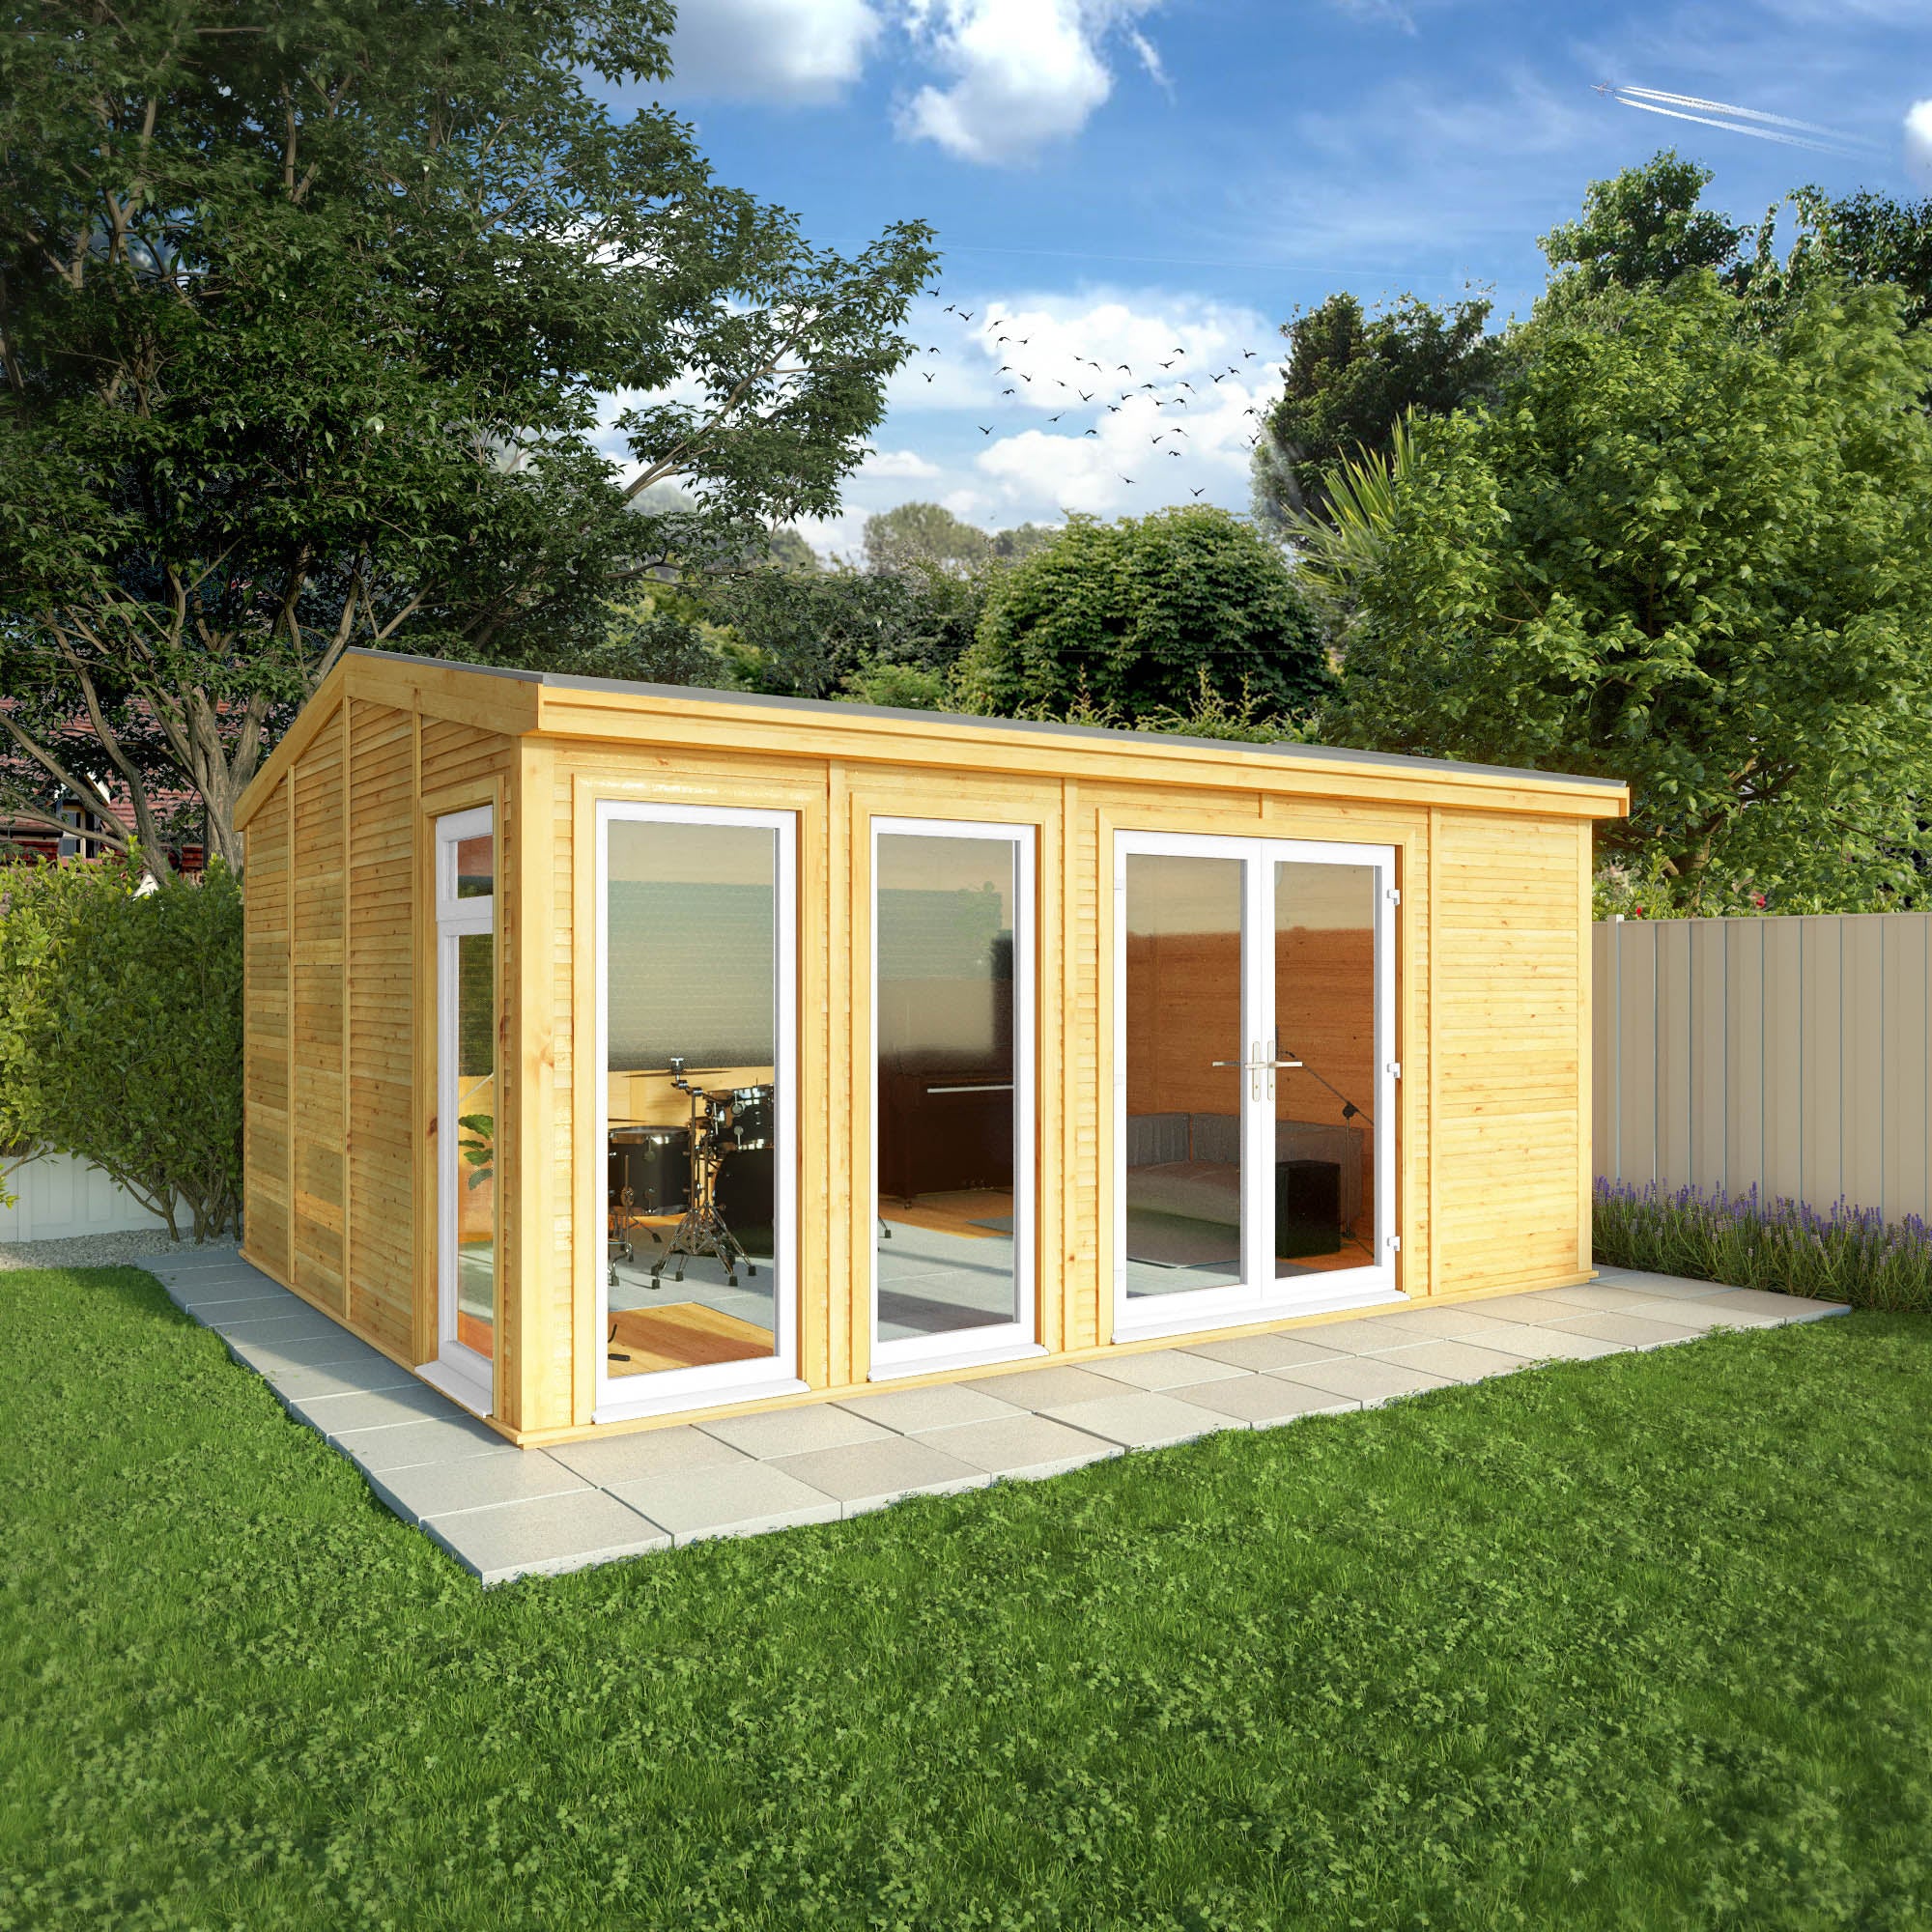 The Rufford 5m x 4m Premium Insulated Garden Room with White UPVC